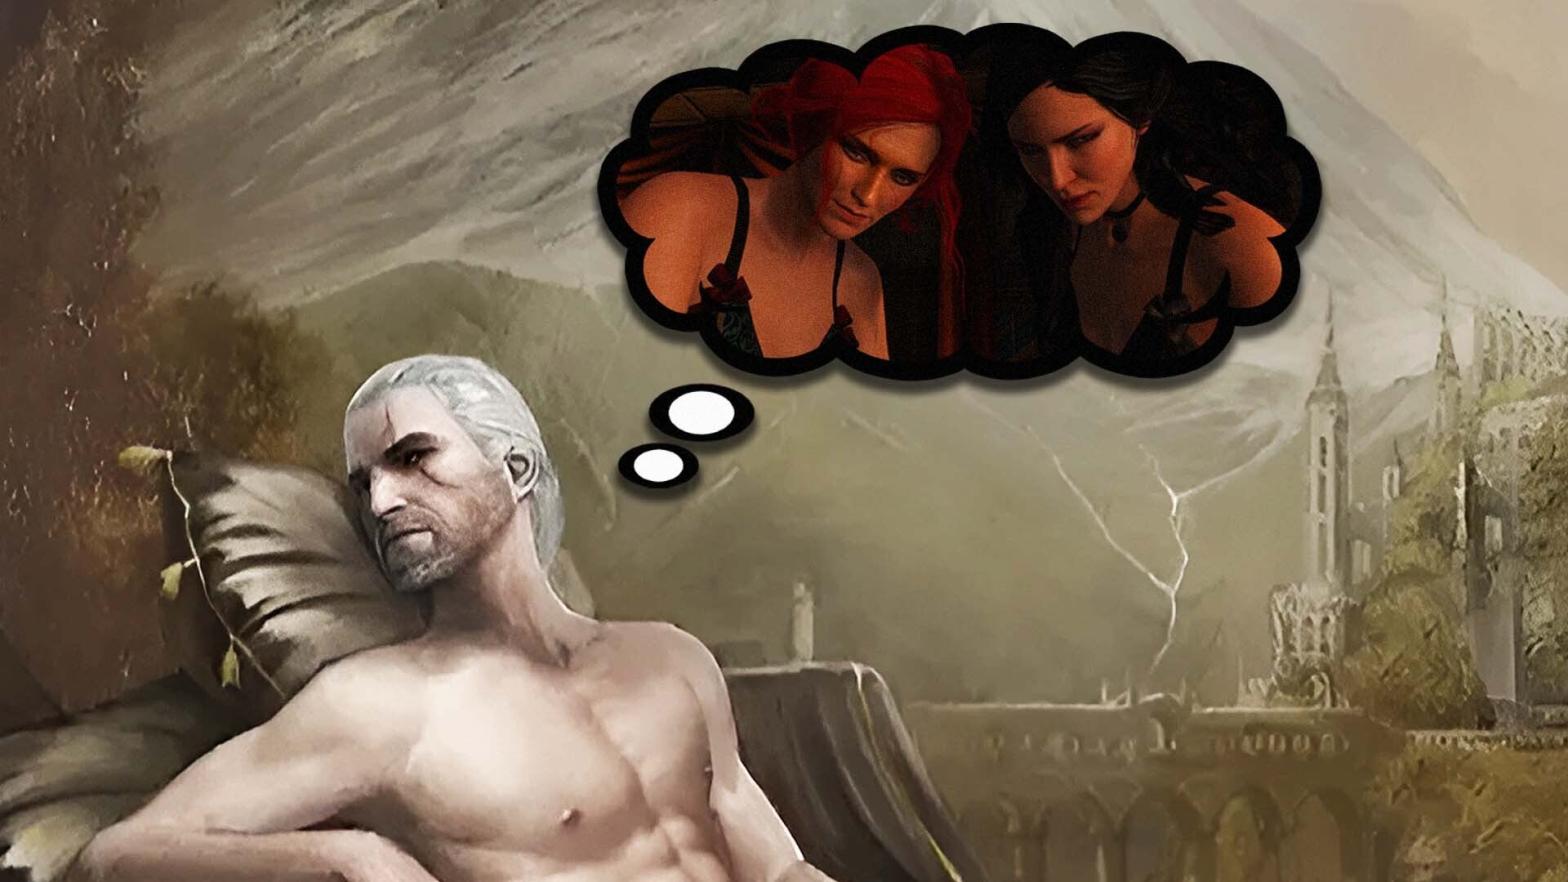 What a funny story, Gerry. Haha. Anyway, how's your sex life? (Image: CD PROJEKT RED / Kotaku)